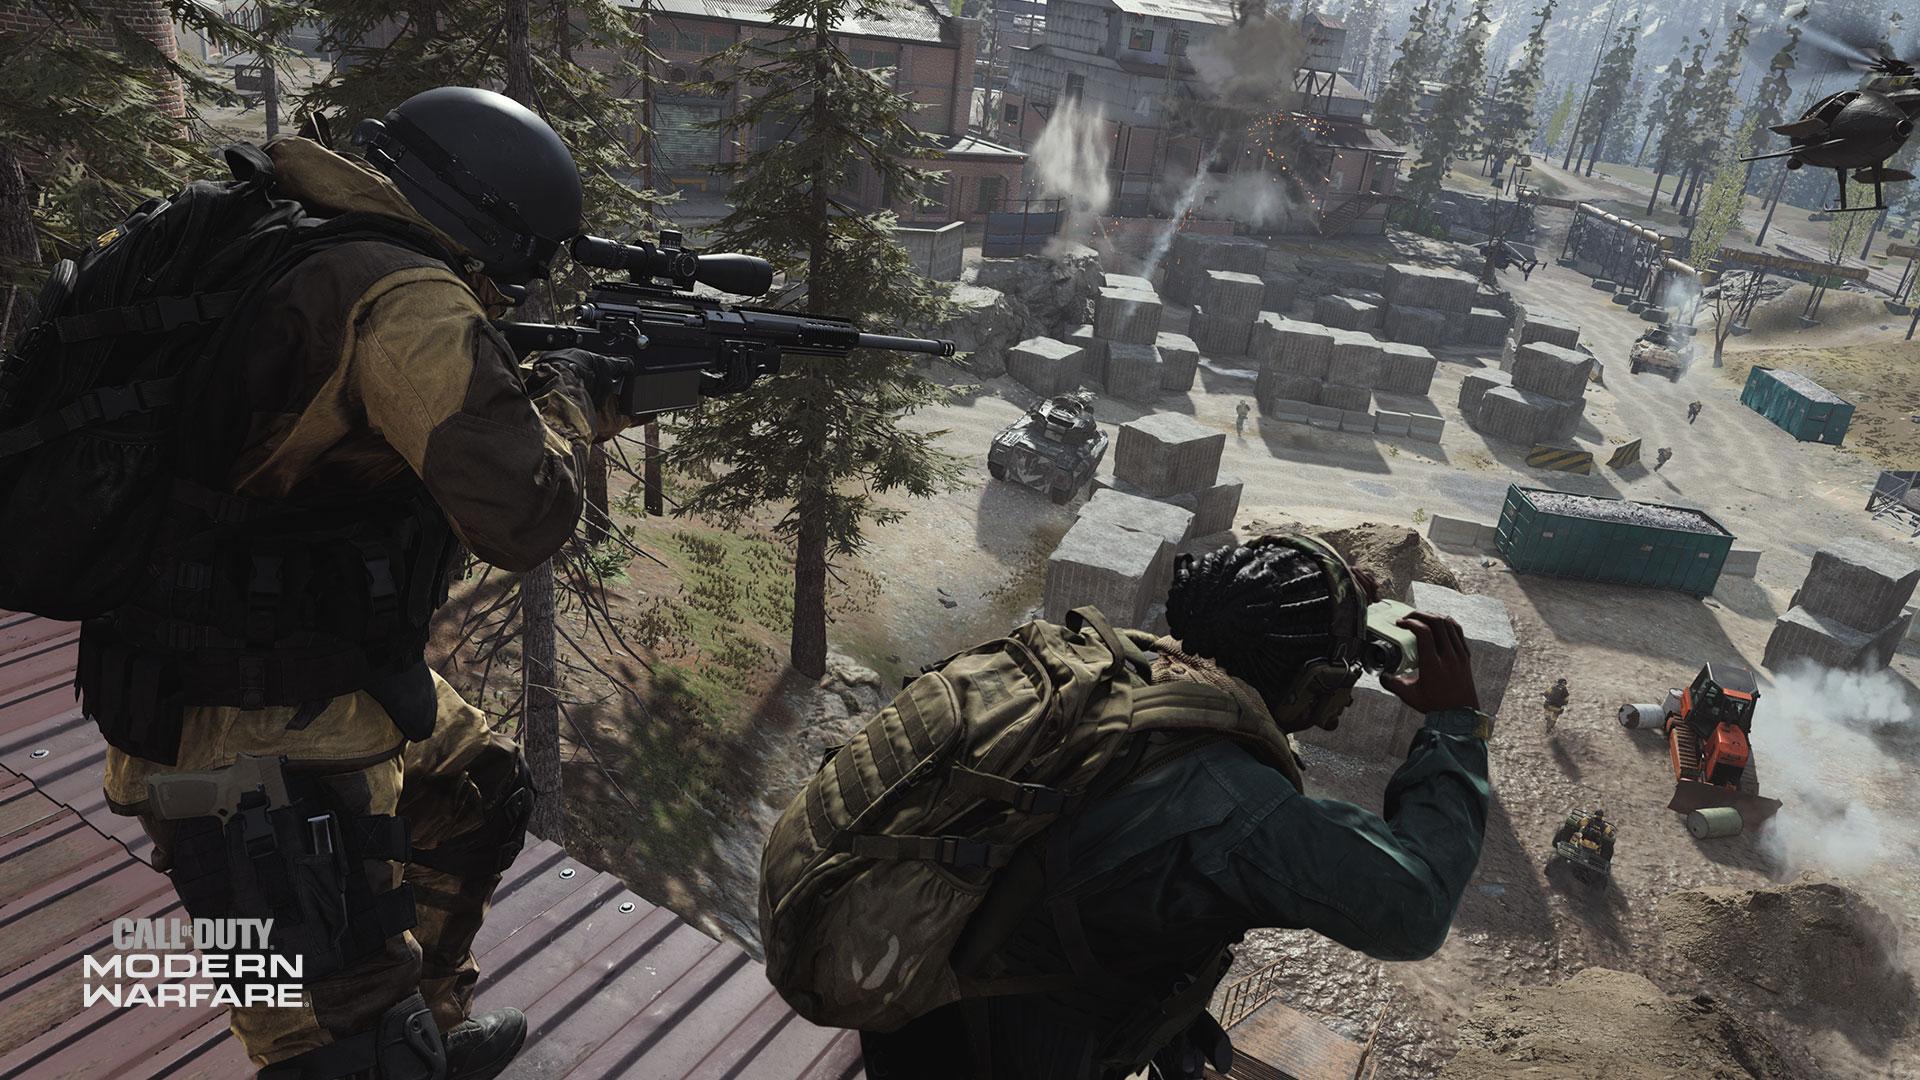 The 'Call Of Duty: Modern Warfare' Beta On PC, Xbox One And PS4 Is